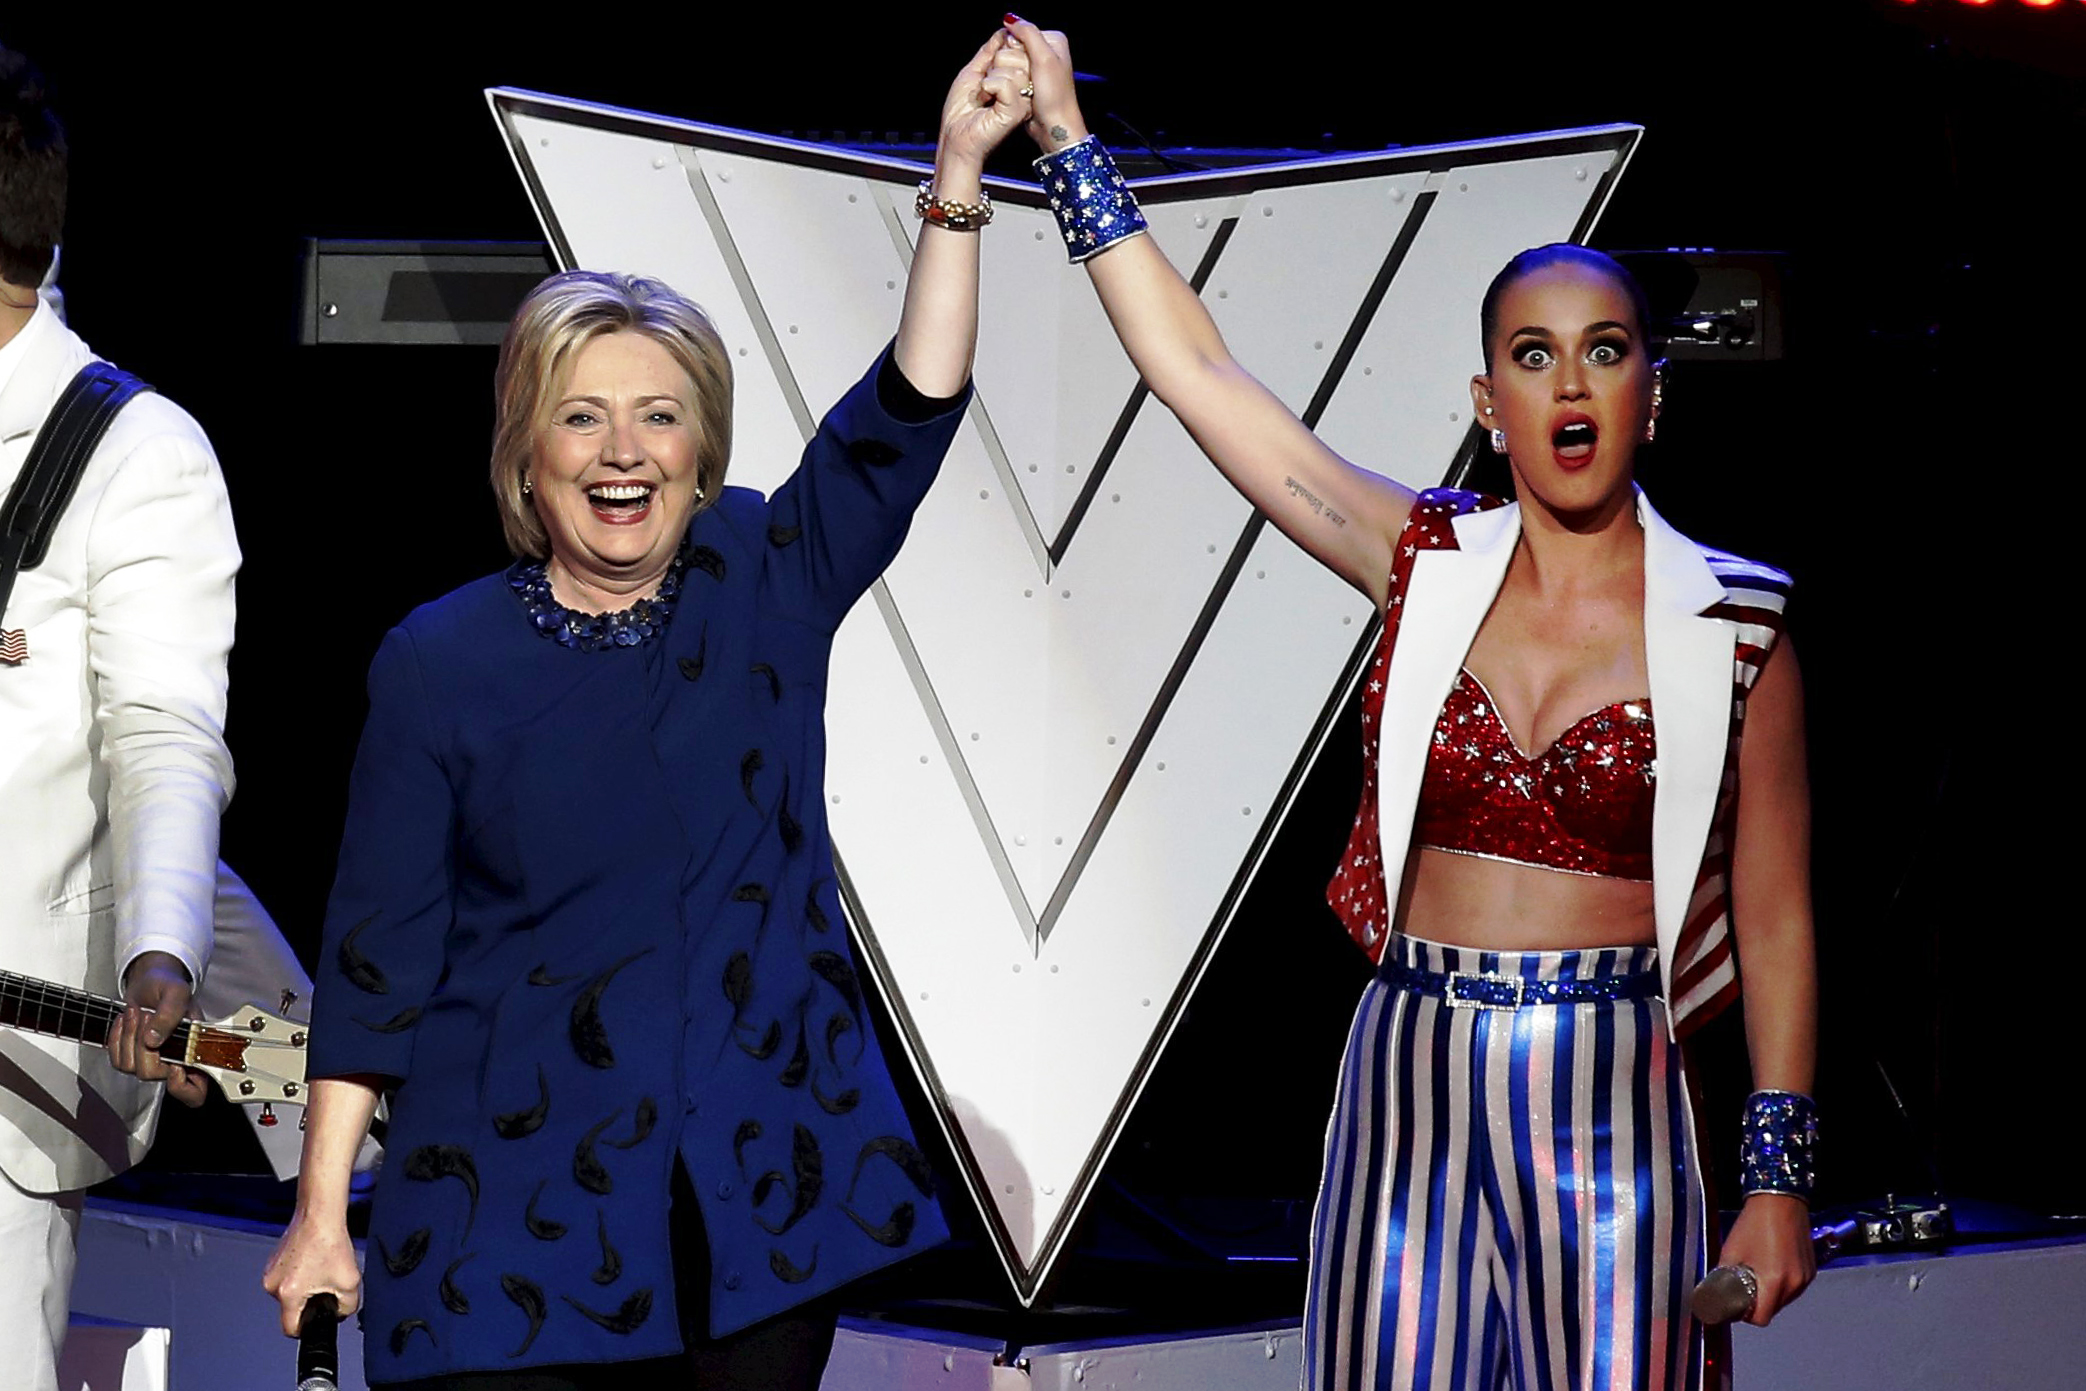 Katy Perry raises arms with Democratic presidential candidate, former Secretary of State Hillary Clinton during a benefit concert at Radio City Music Hall in New York on March 2.